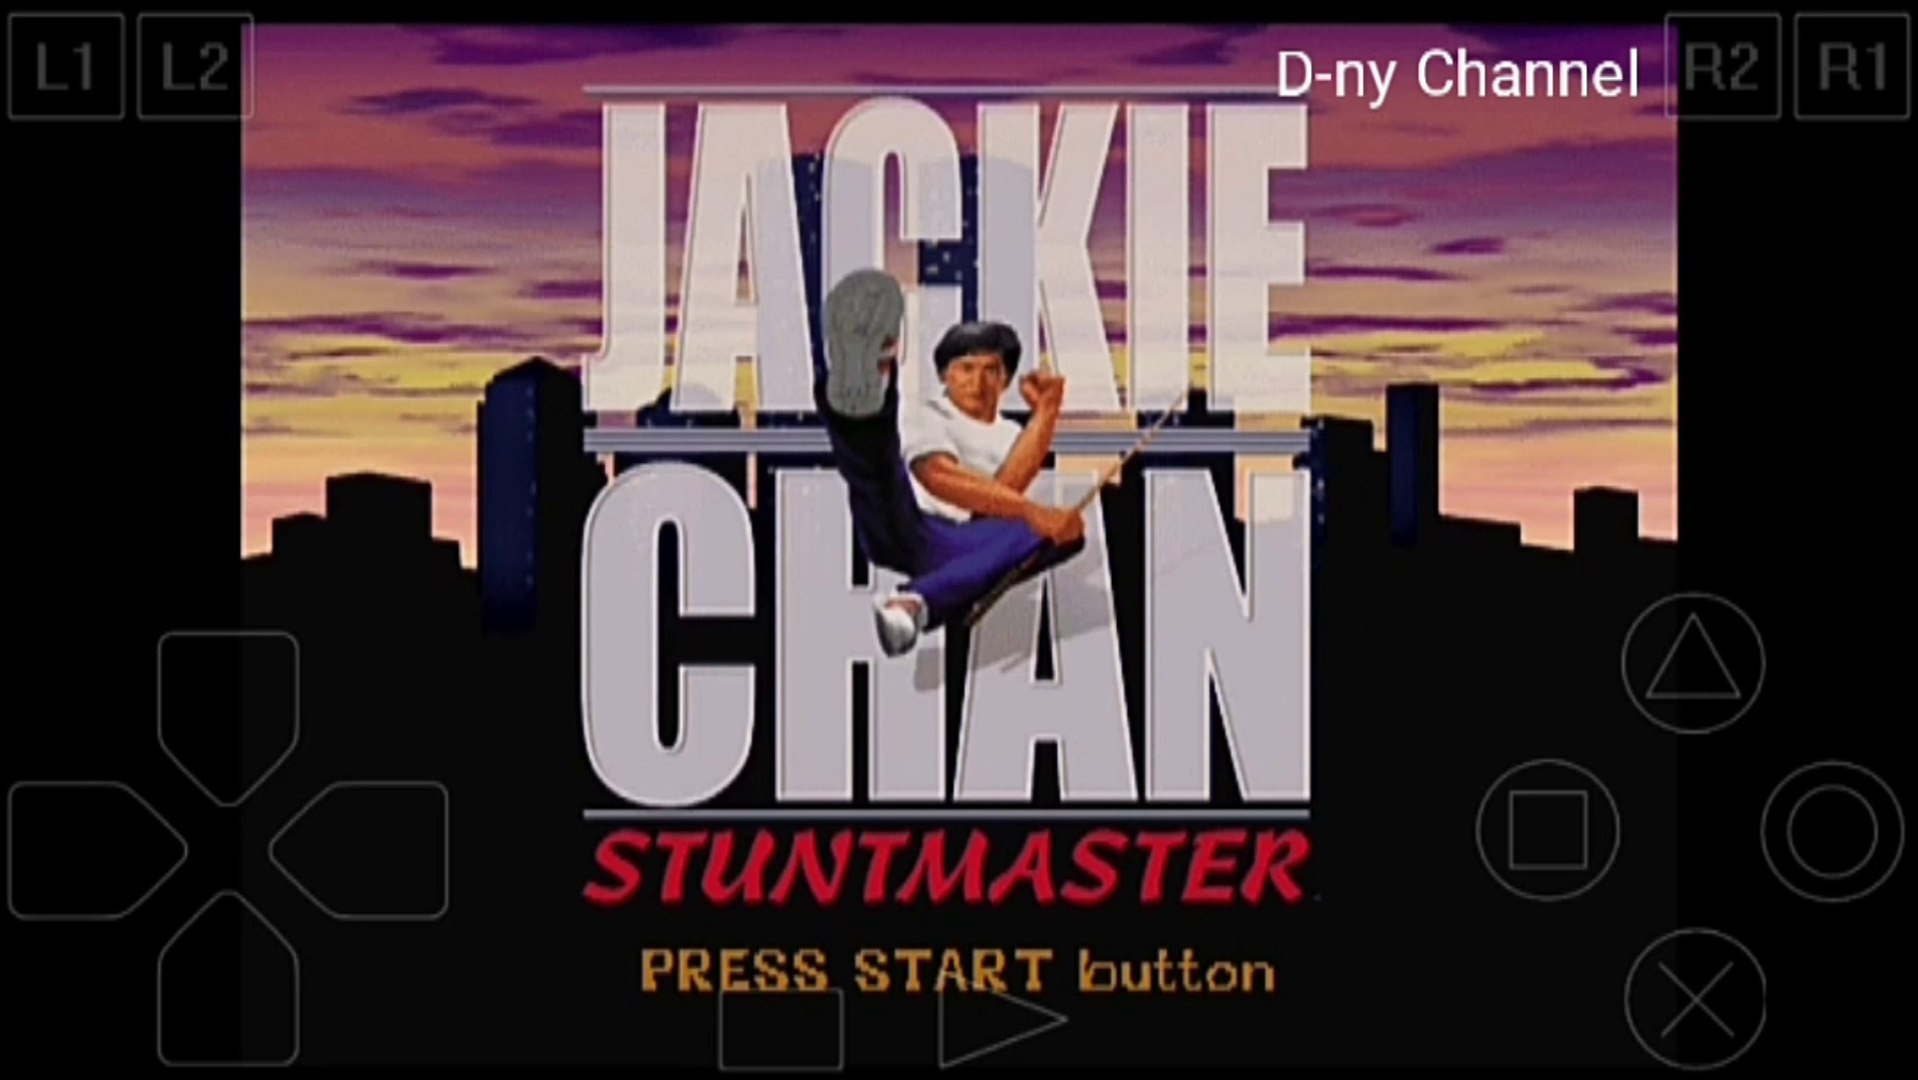 Jackie Chan Stuntmaster The Movie - Psx (playstation/ps1) Action Game  android 3D (ePSXe) - video Dailymotion